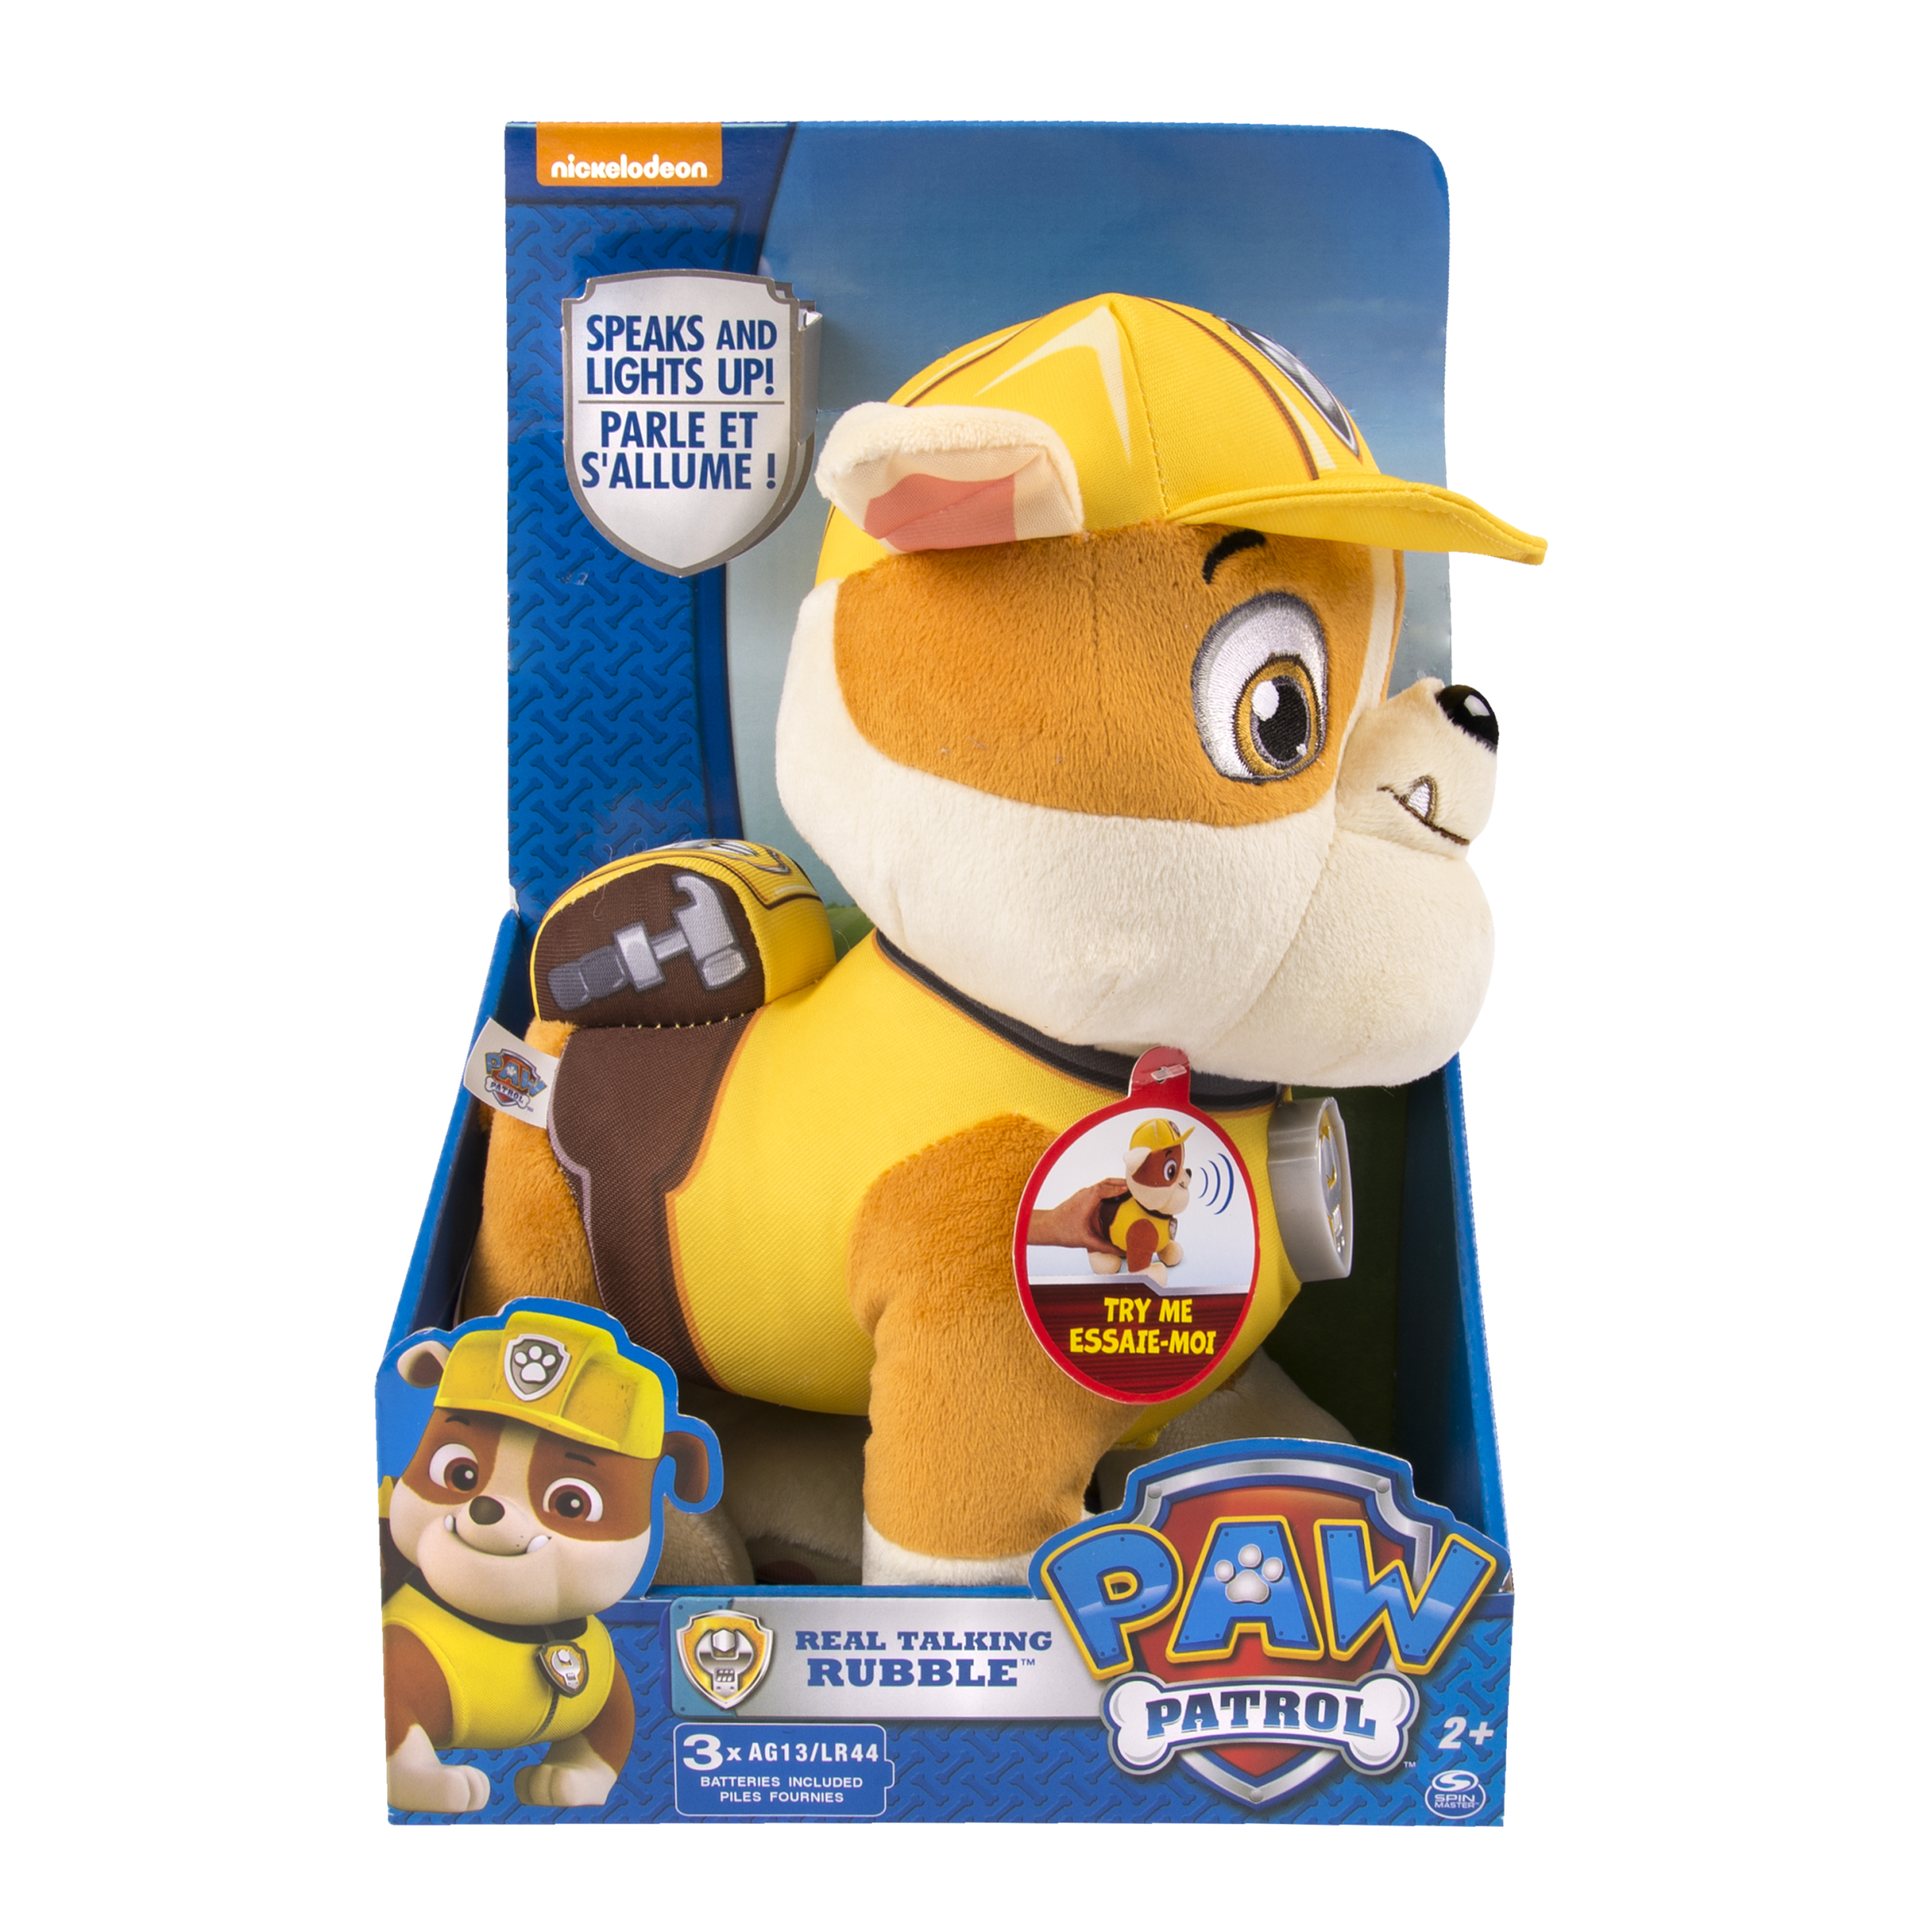 Paw Patrol Deluxe Lights and Sounds Plush, Real Talking Rubble - image 4 of 5